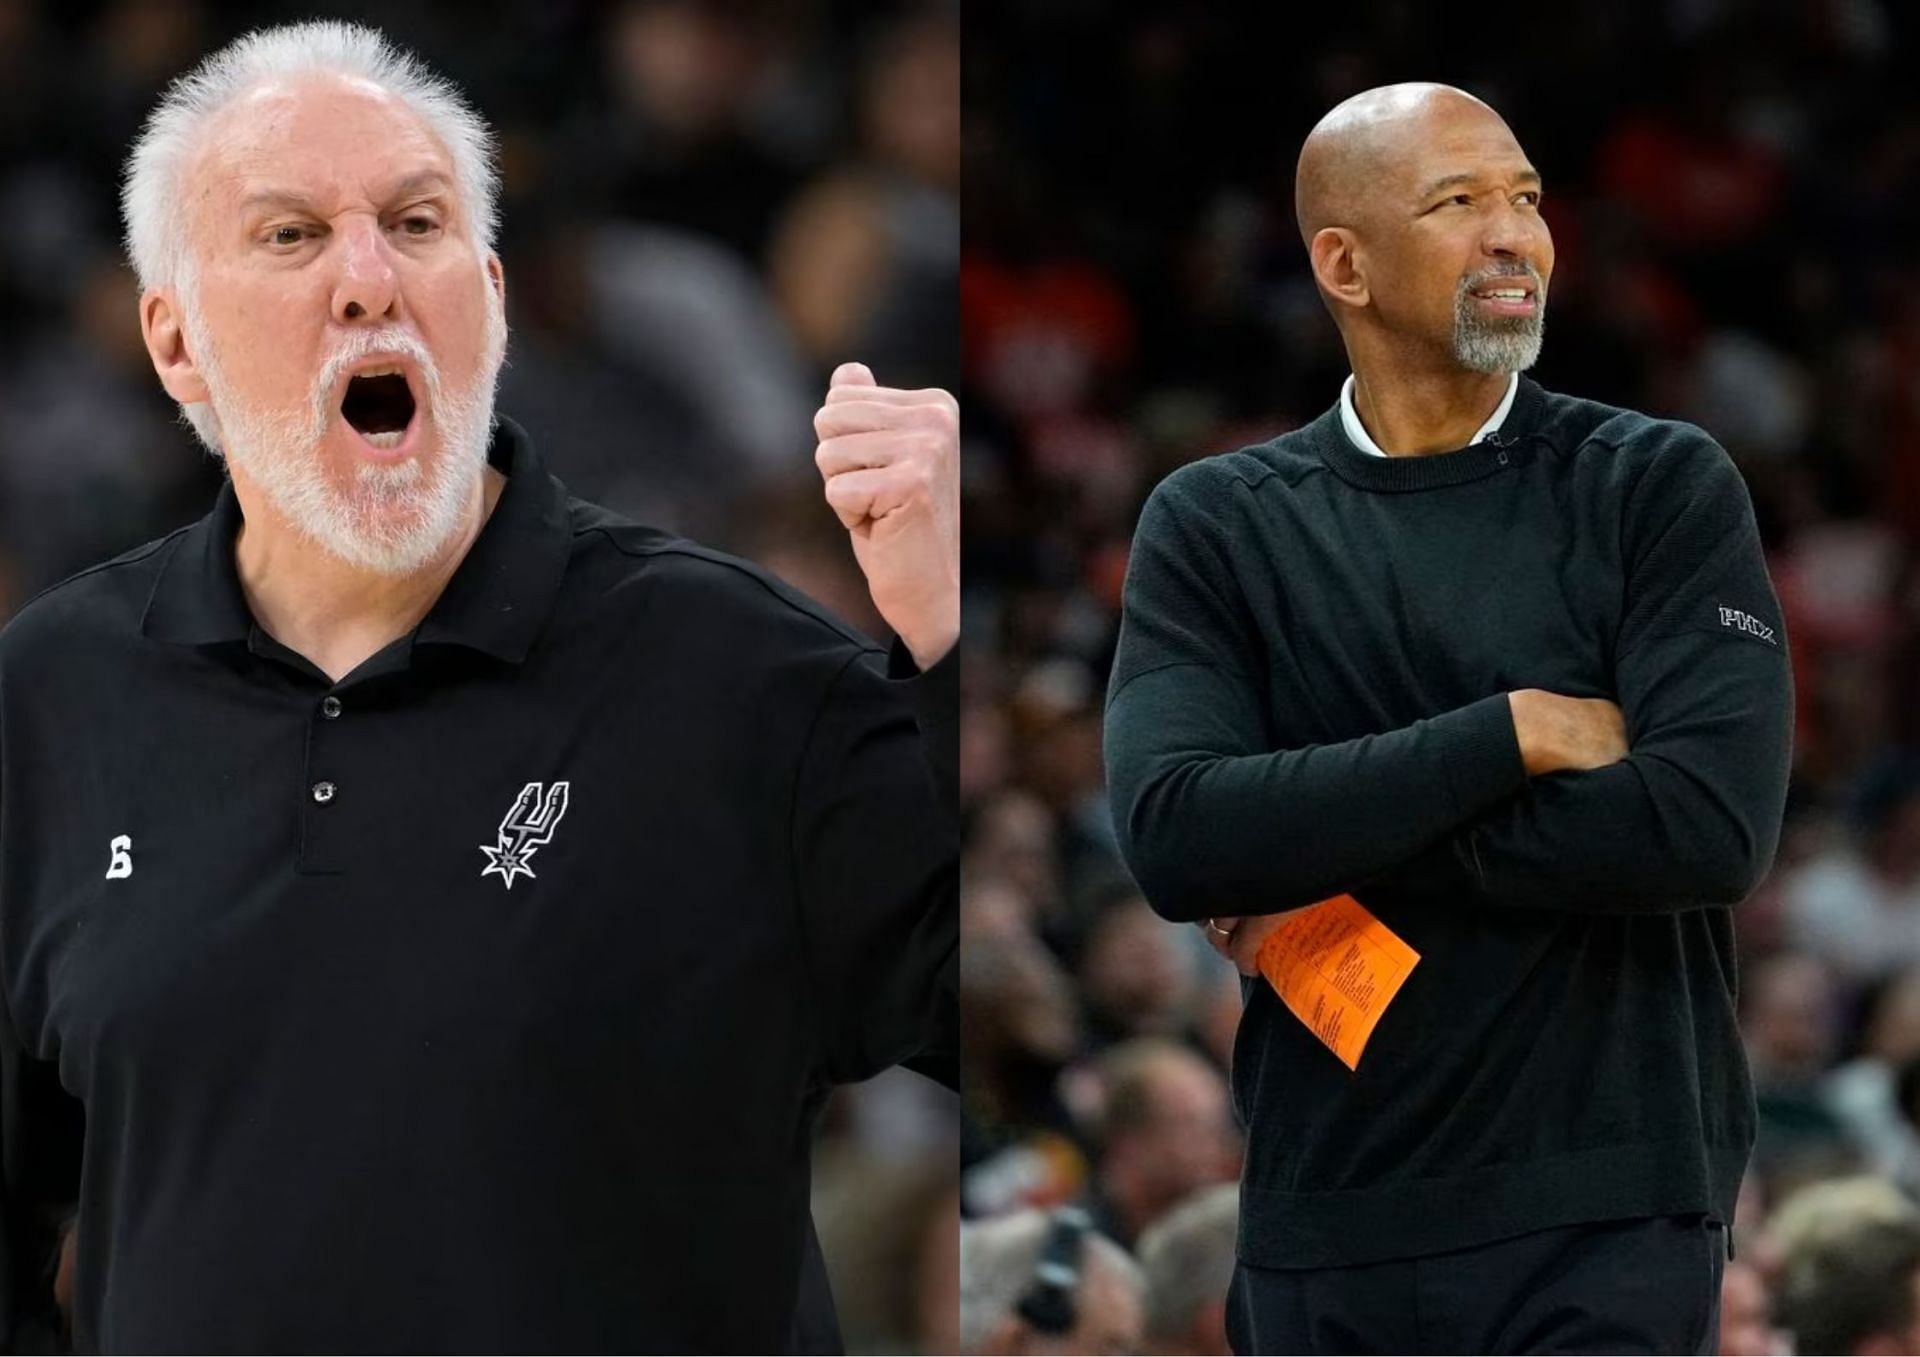 Monty Williams and Gregg Popovich are 1-2 as the best-paid coaches in the NBA.